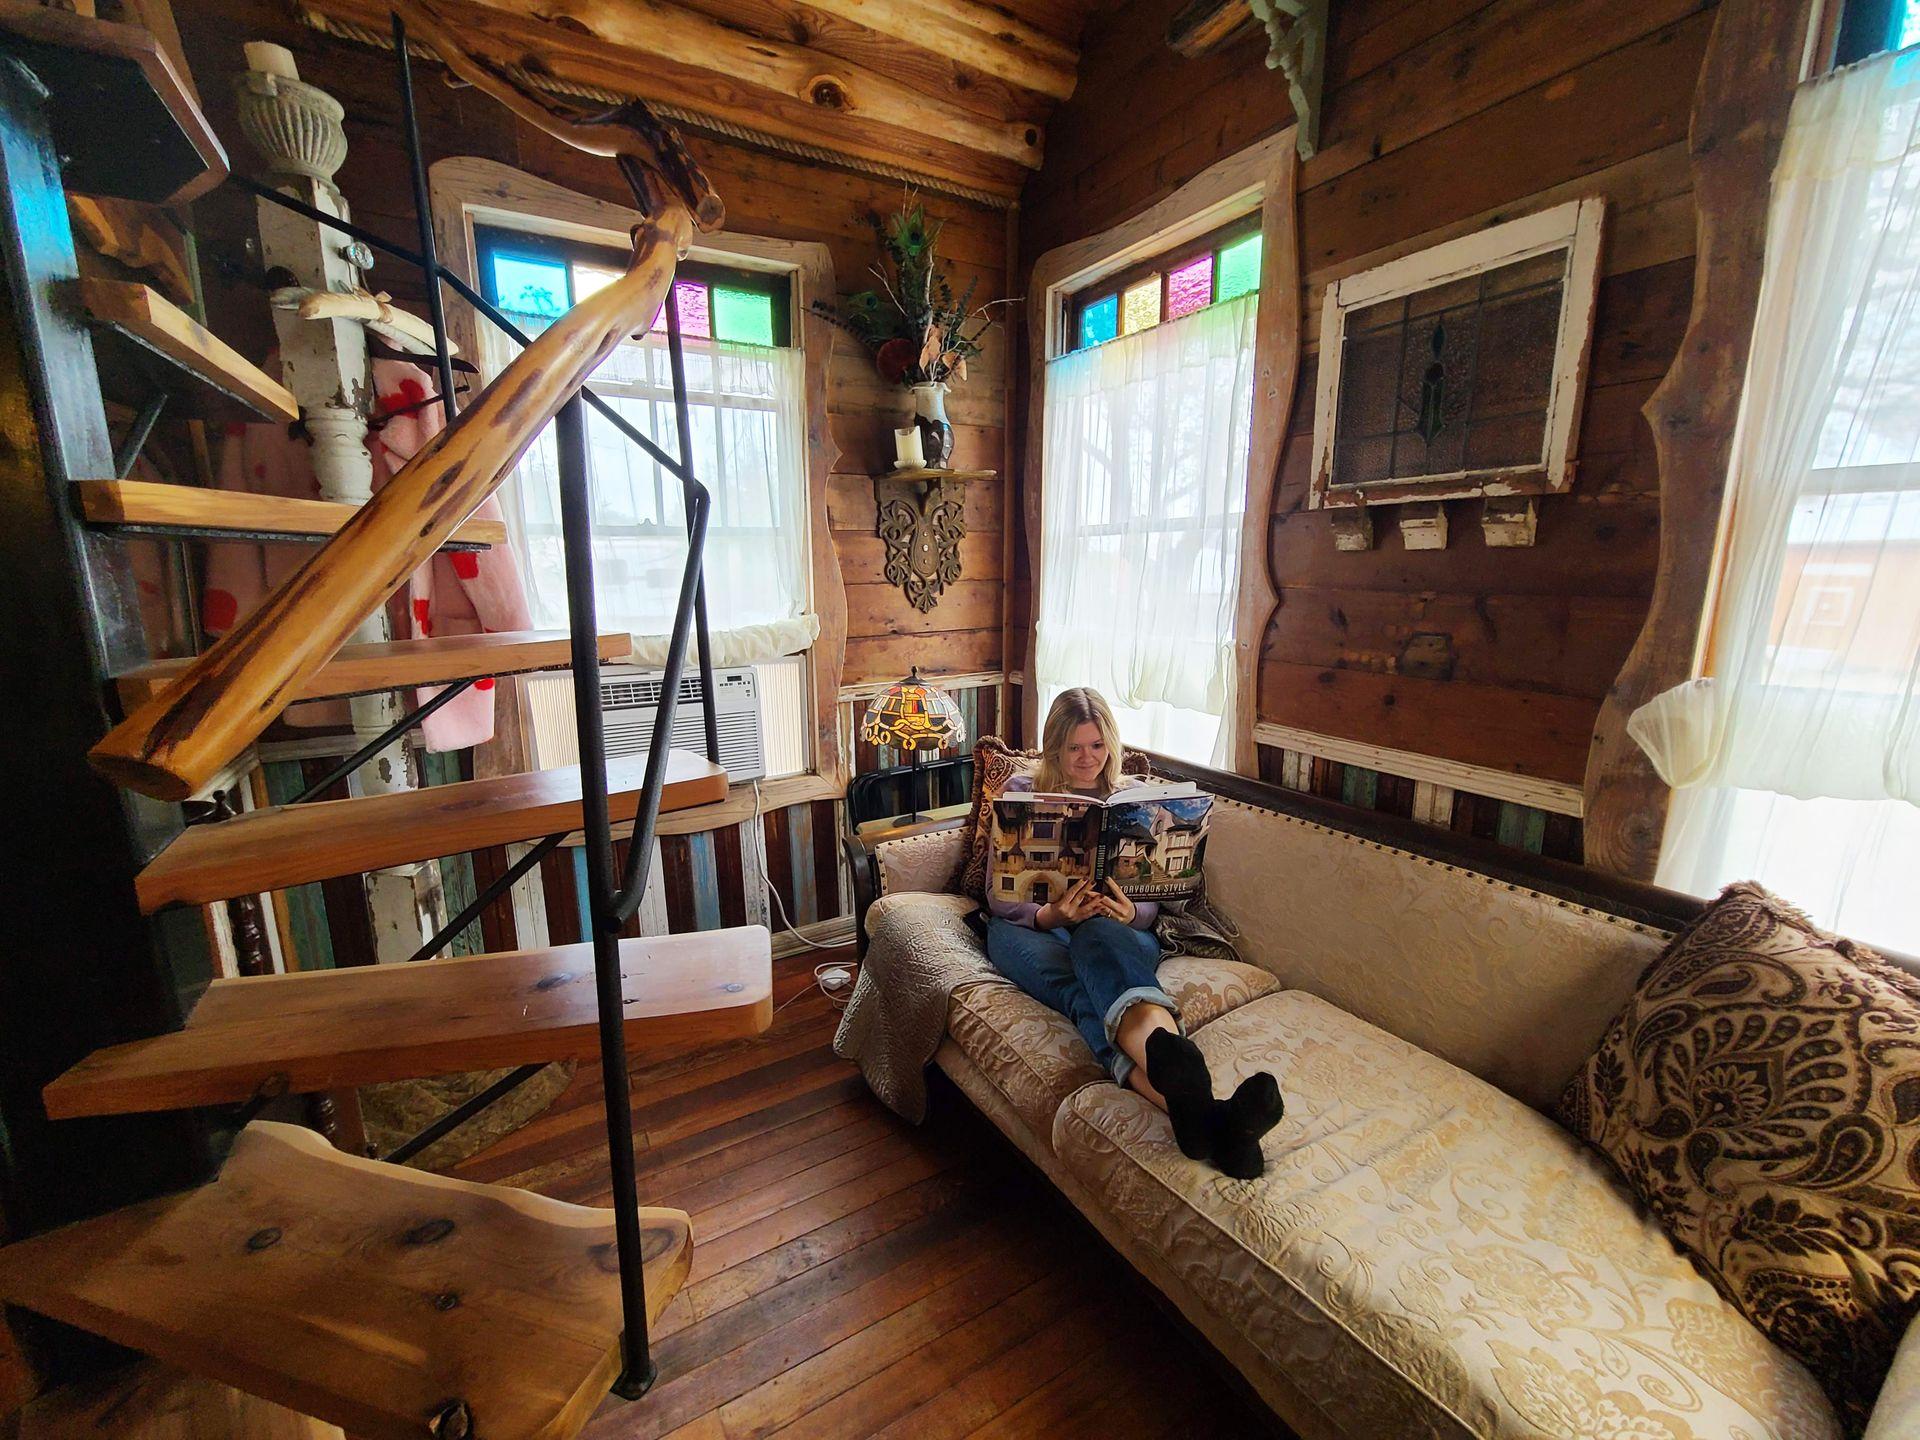 Lydia reading on the vintage couch inside of the Havenwald storybook Airbnb in Dripping Springs, Texas.